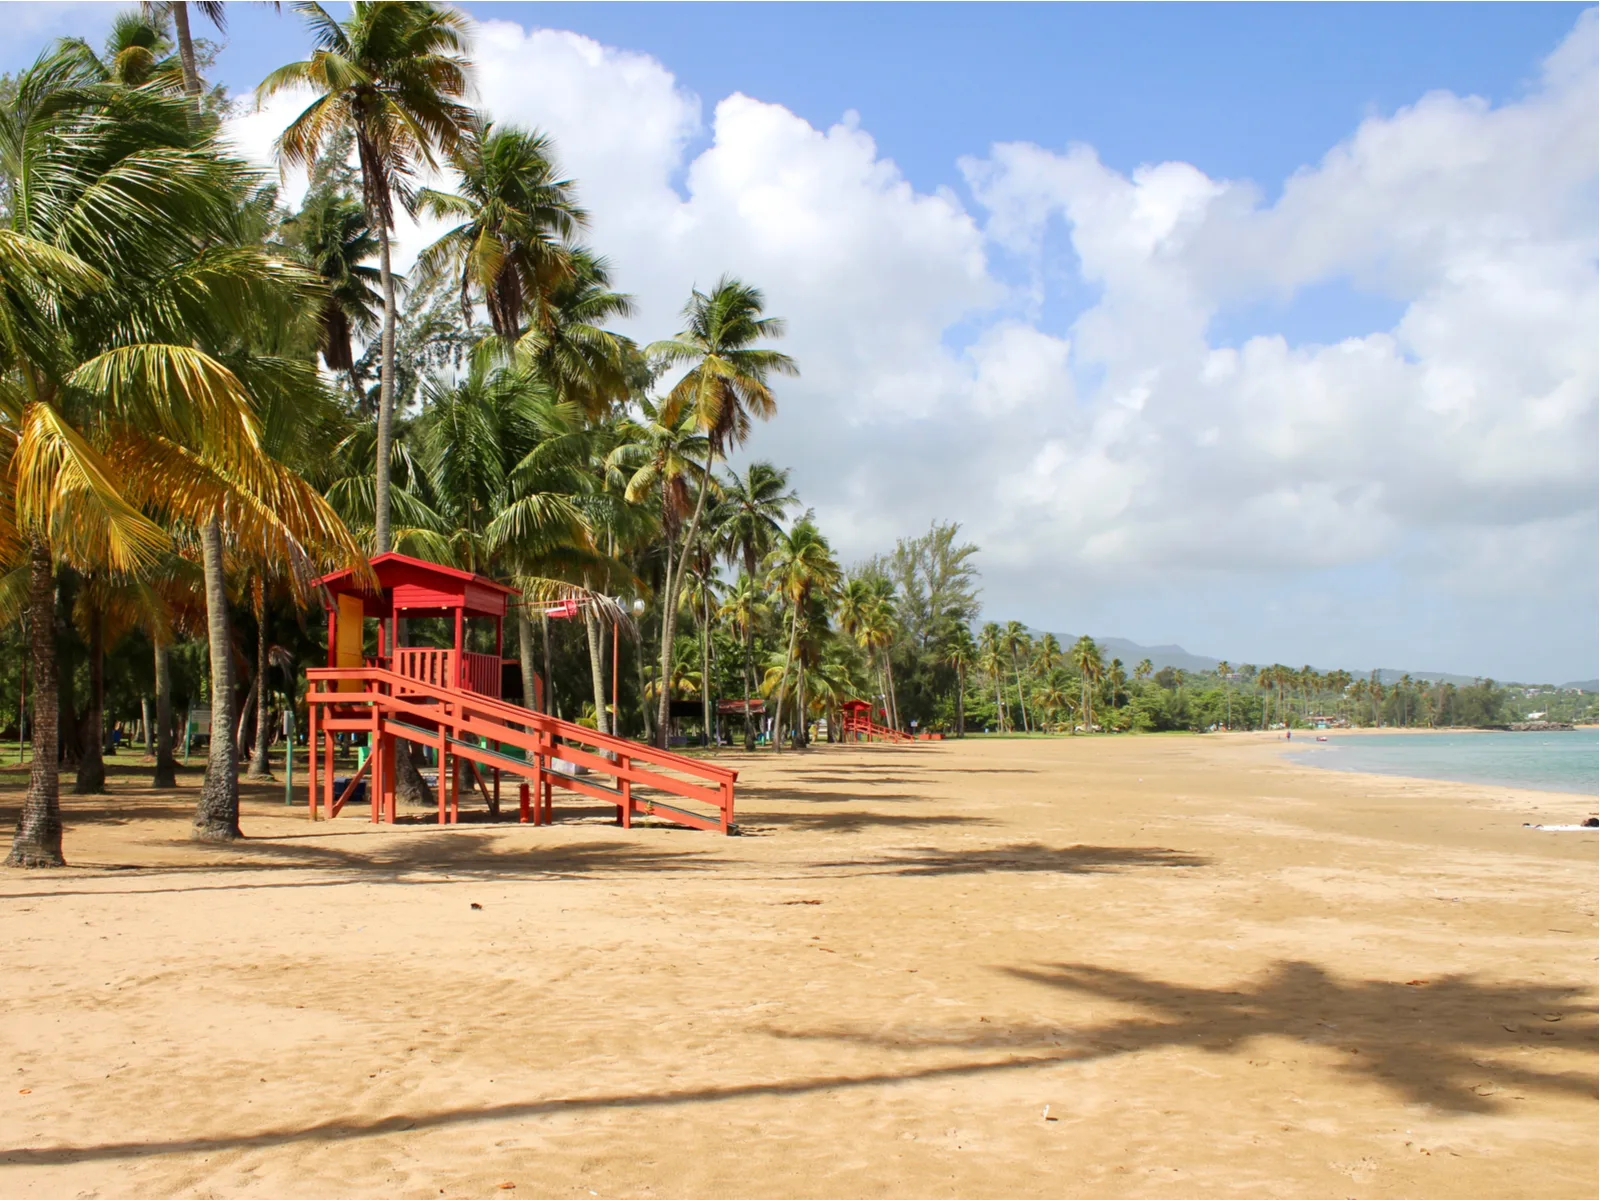 Guard house on Luquillo Beach, one of the best beaches in Puerto Rico